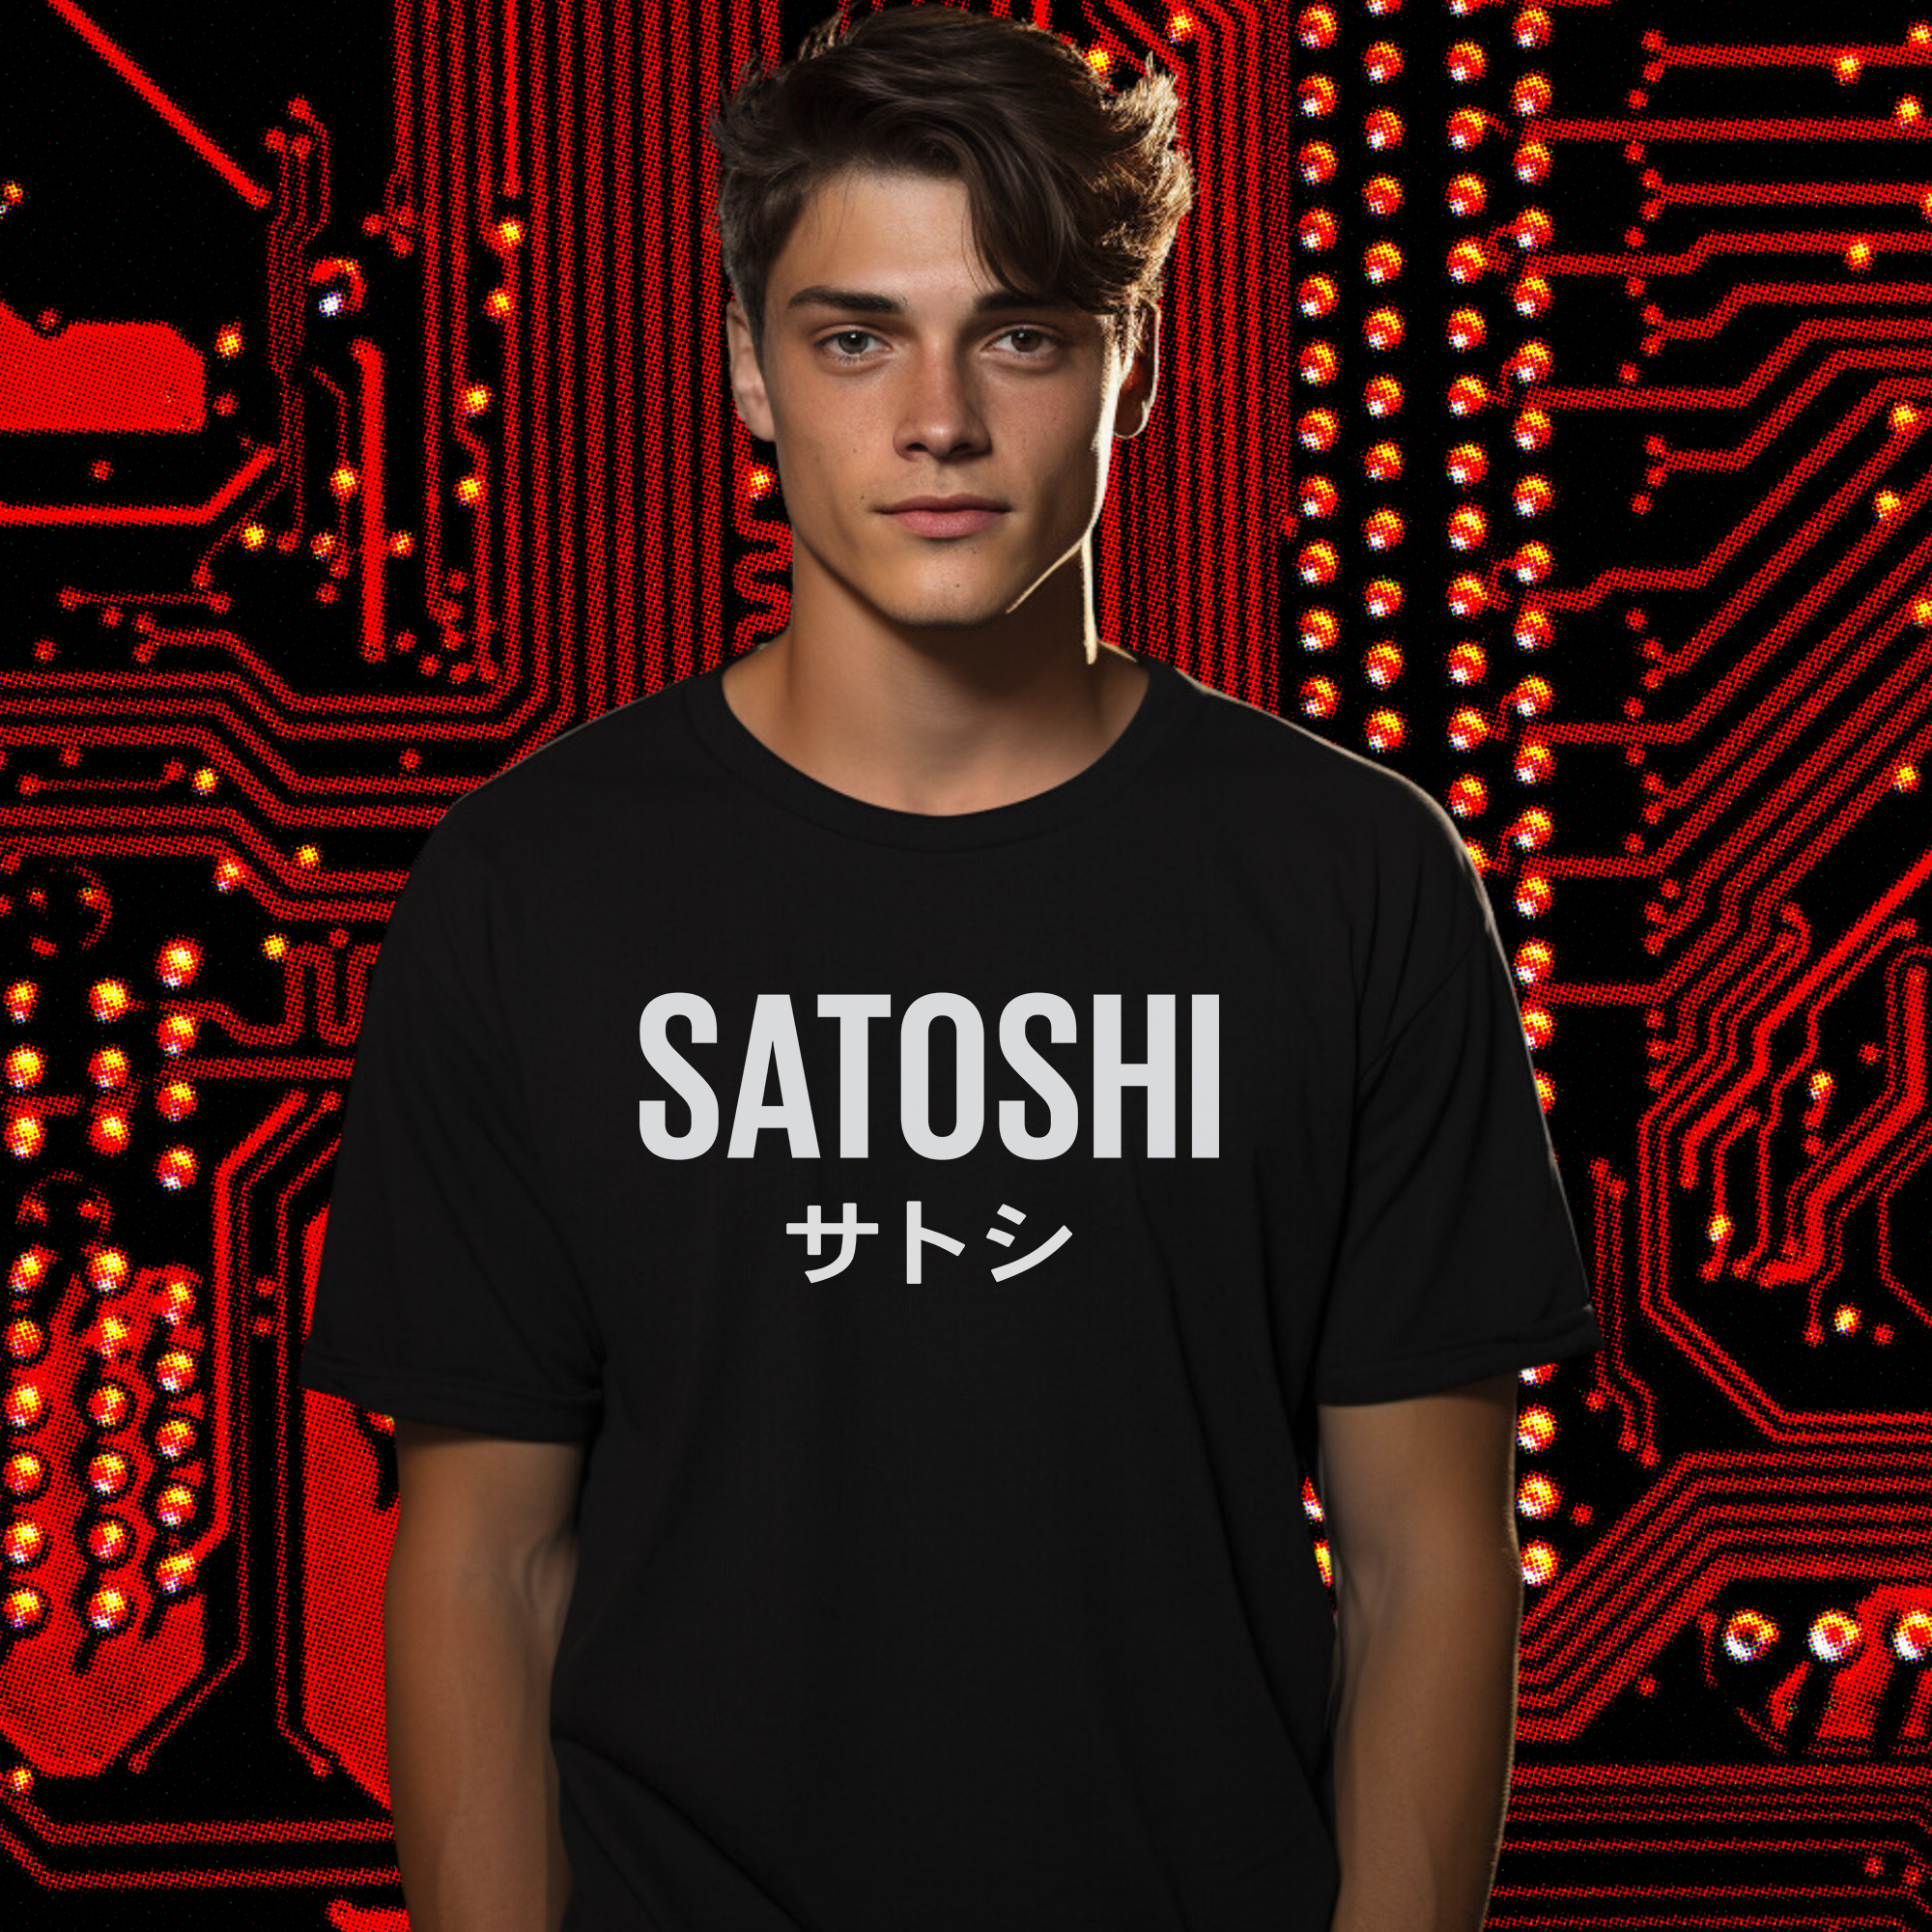 Bitcoin Apparel - Satoshi Shirt worn by male model (front view). 